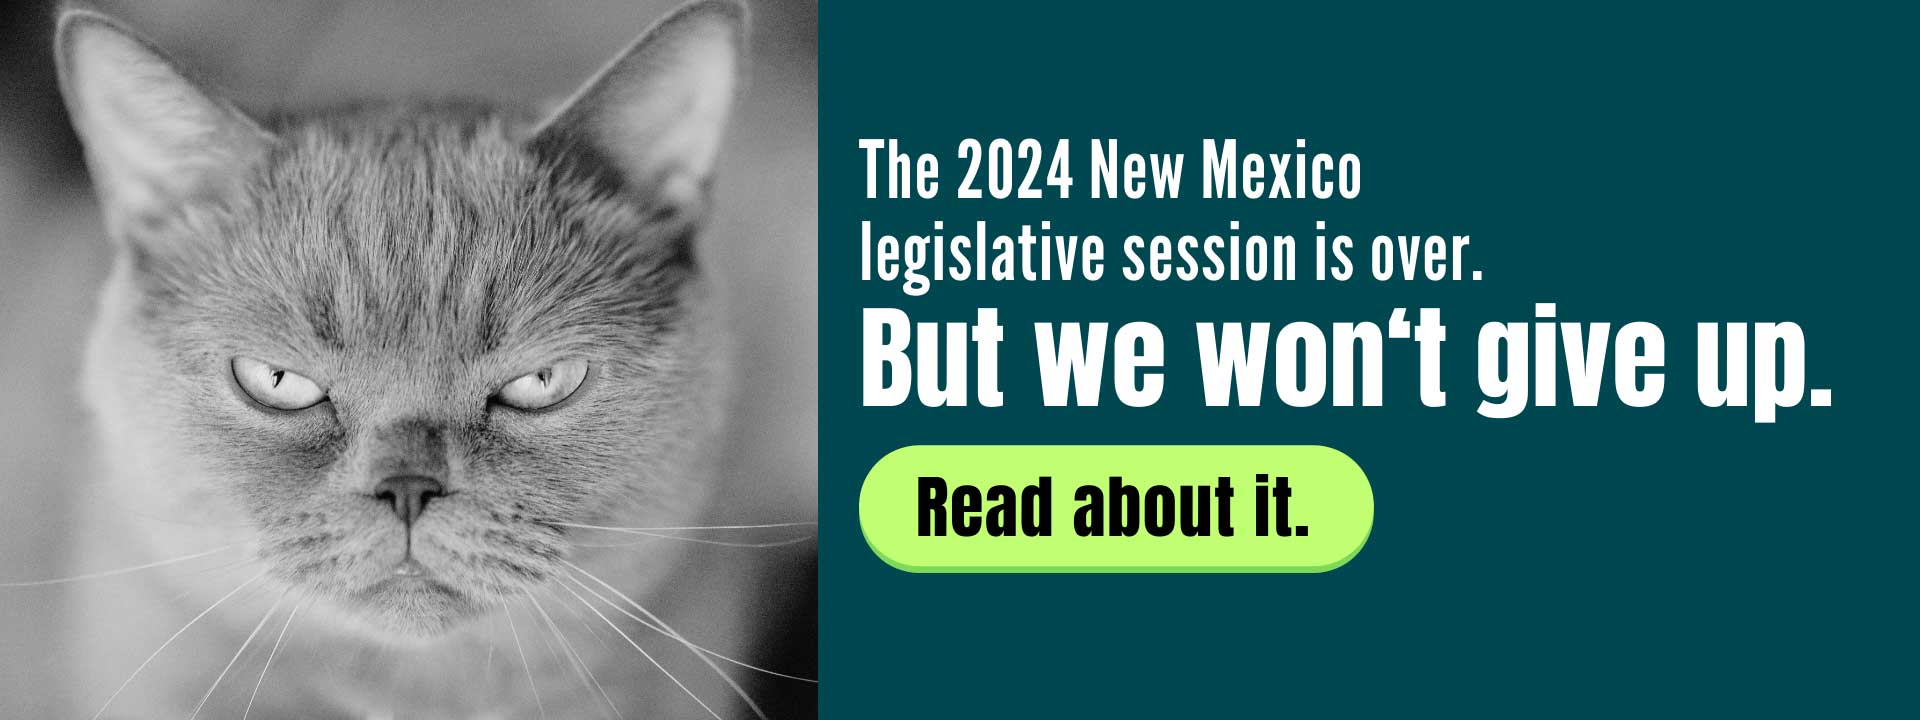 The 2024 New Mexico legislative session is over. But we won't give up.